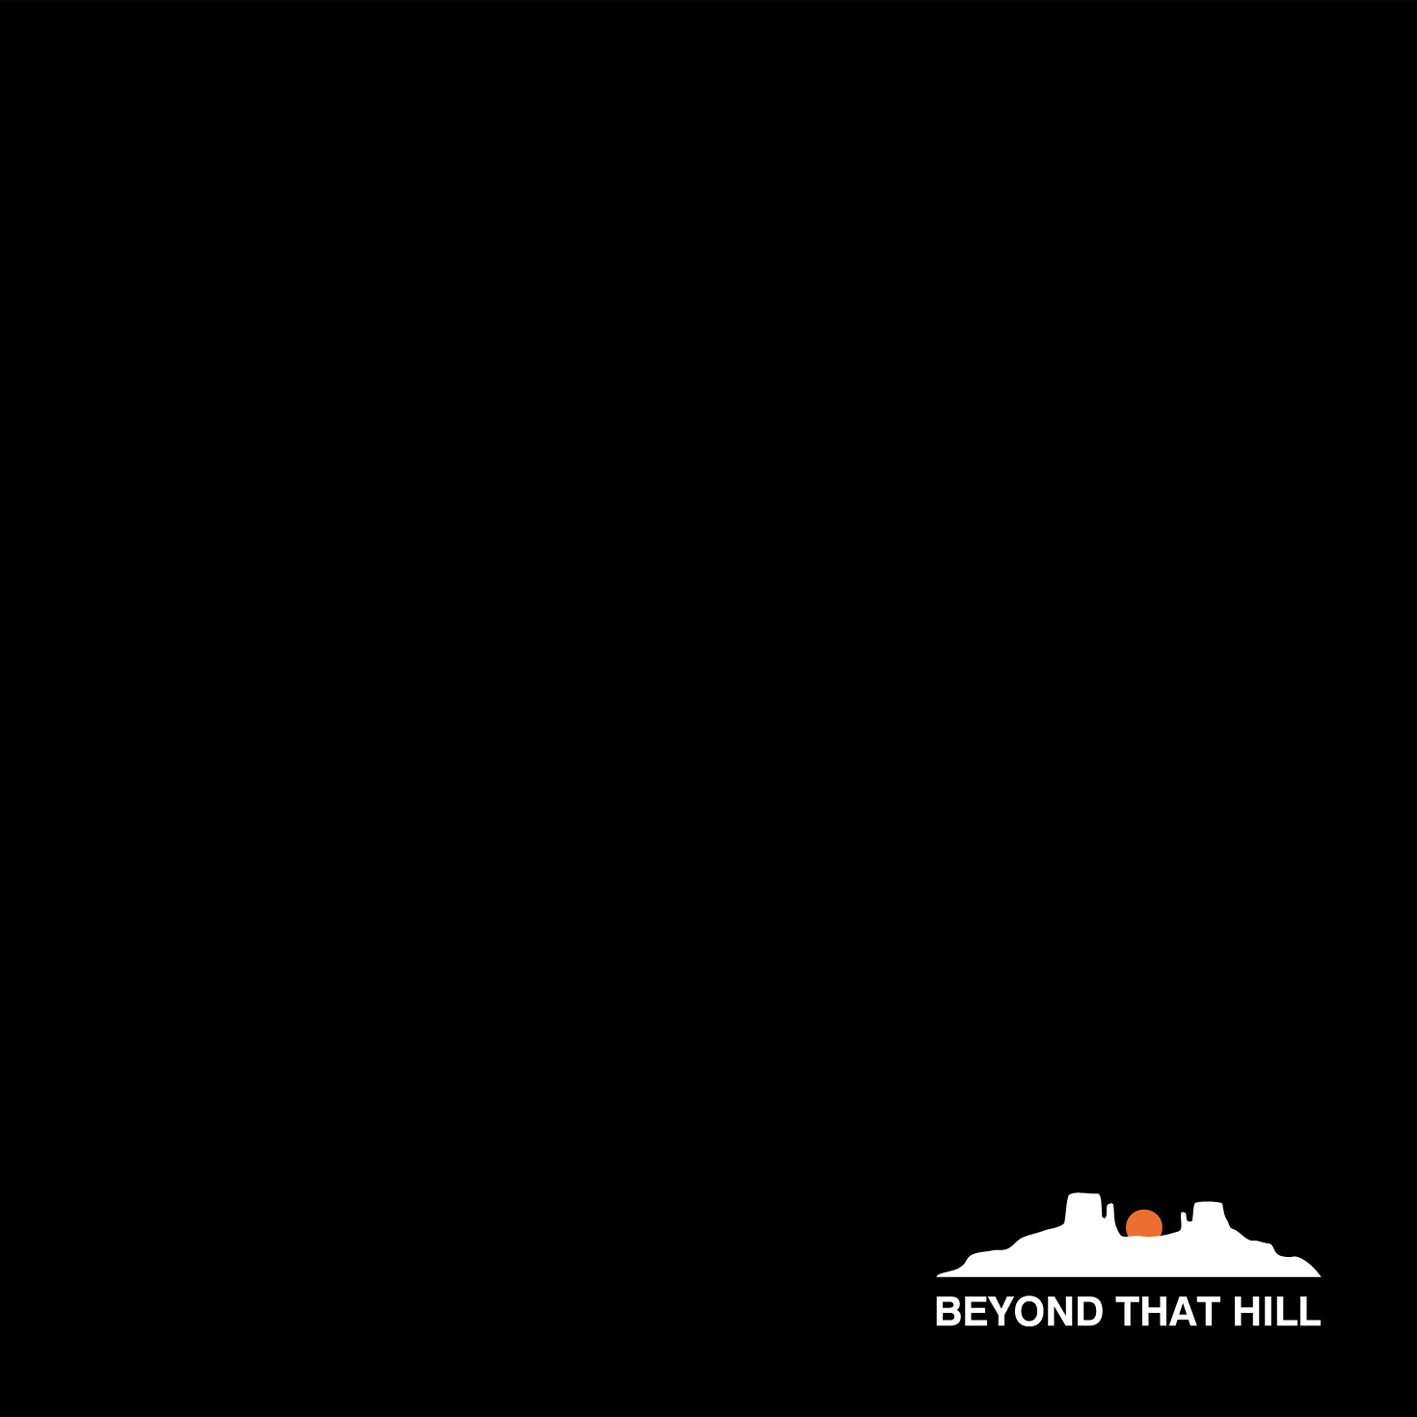 Dusty Kid - Beyond that hill